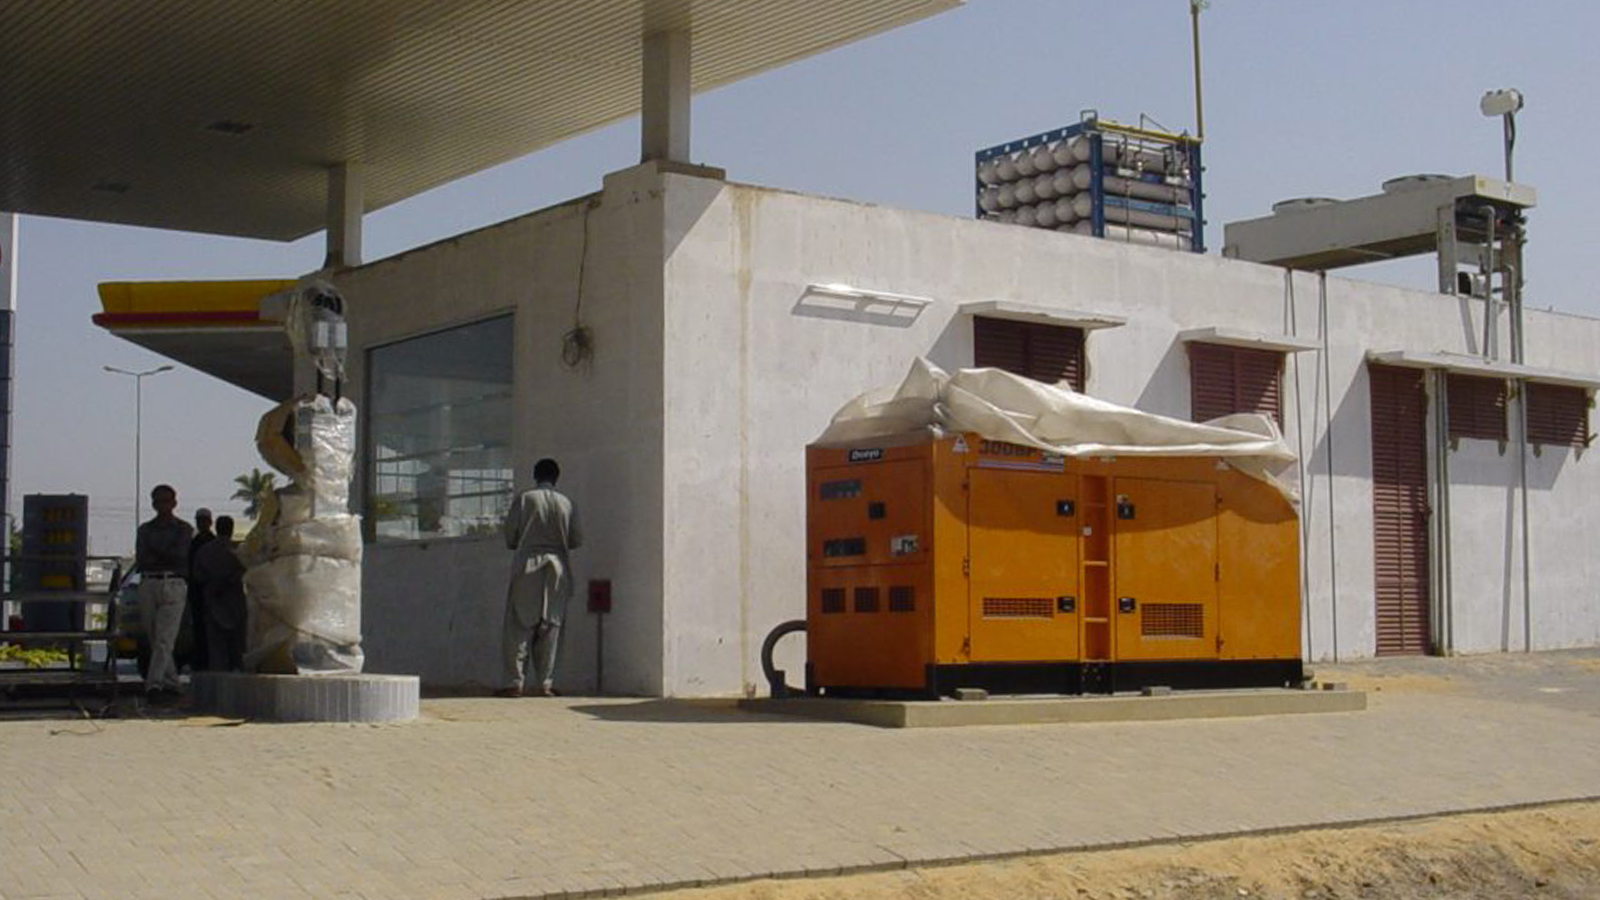 Denyo generator deployed in commercial area